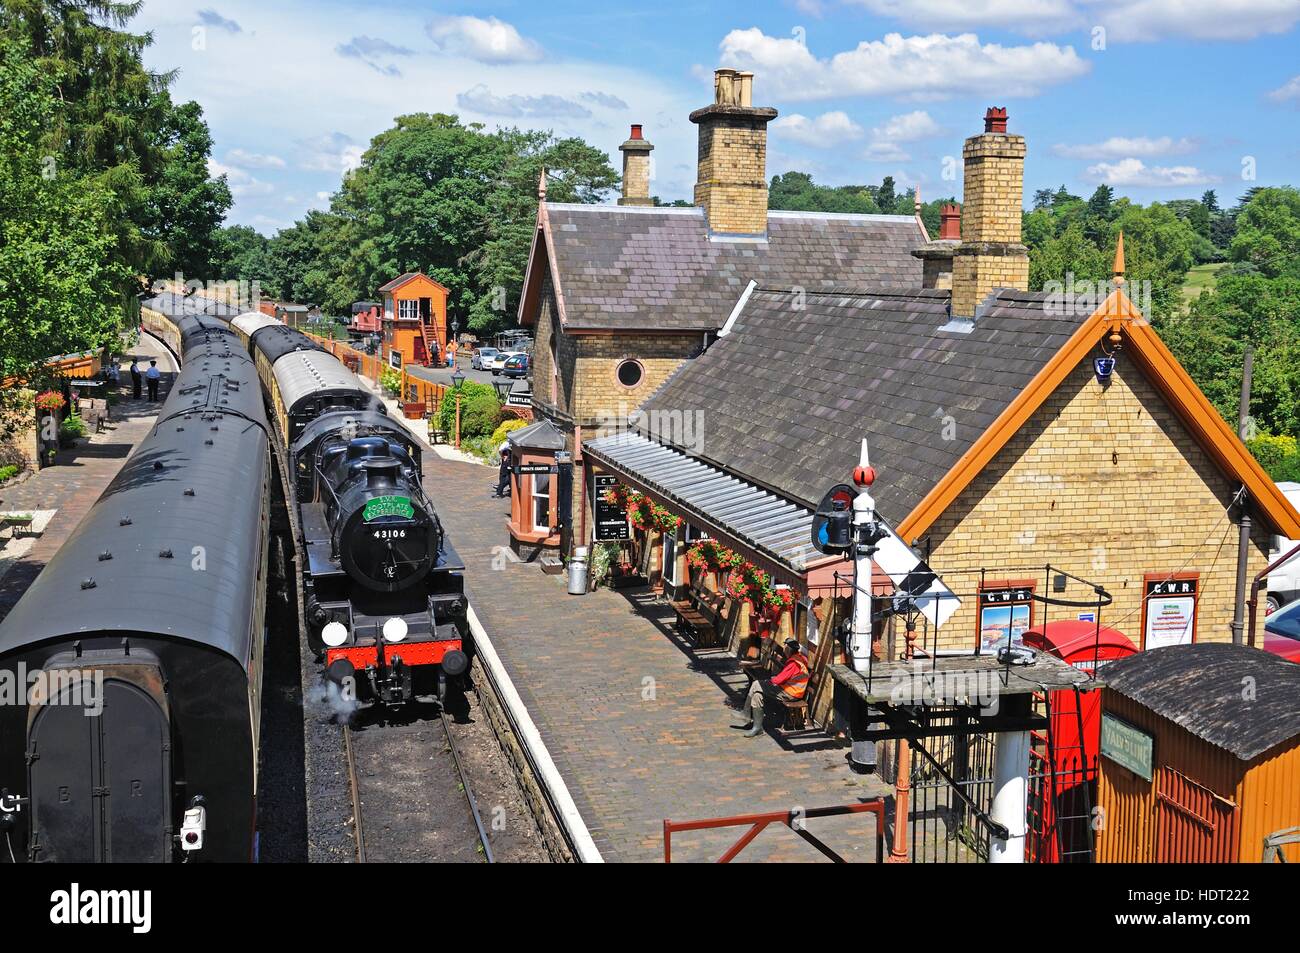 Steam Locomotive Ivatt Class 4 2-6-0 number 43106 in British Rail Black at the railway station, Severn Valley Railway, Arley, Worcestershire, England, Stock Photo